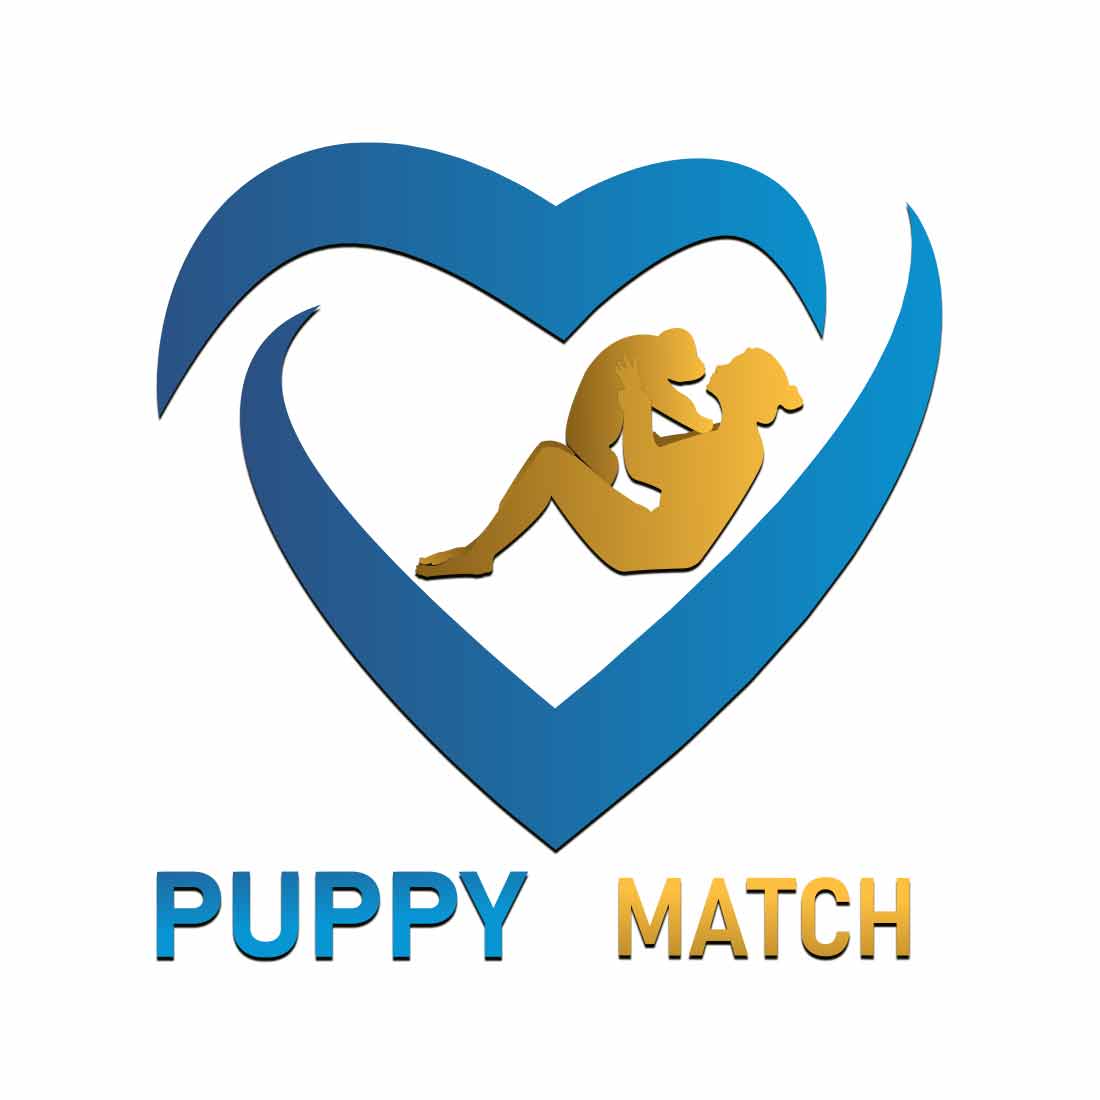 PUPPY MATCH,$7 preview image.